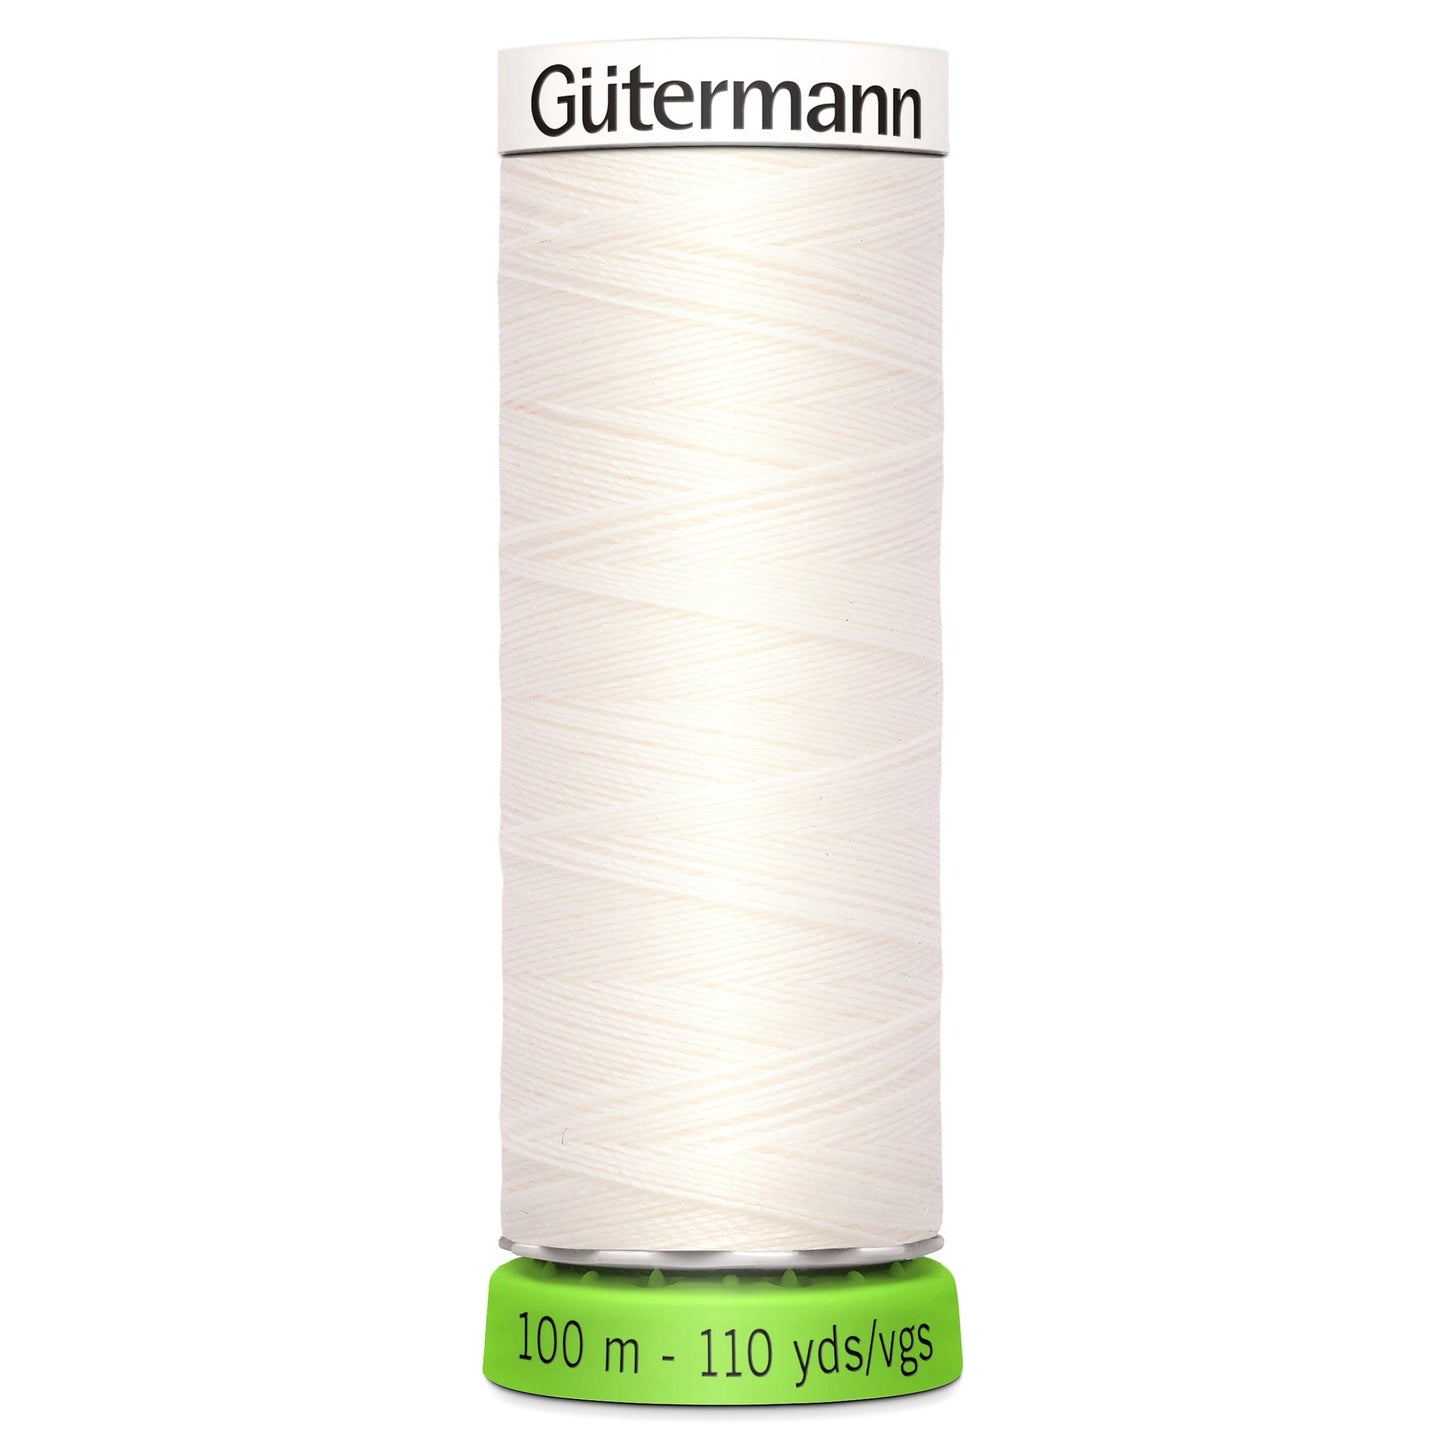 100m Reel Gütermann Recycled Sew-All Thread in Ivory no. 111